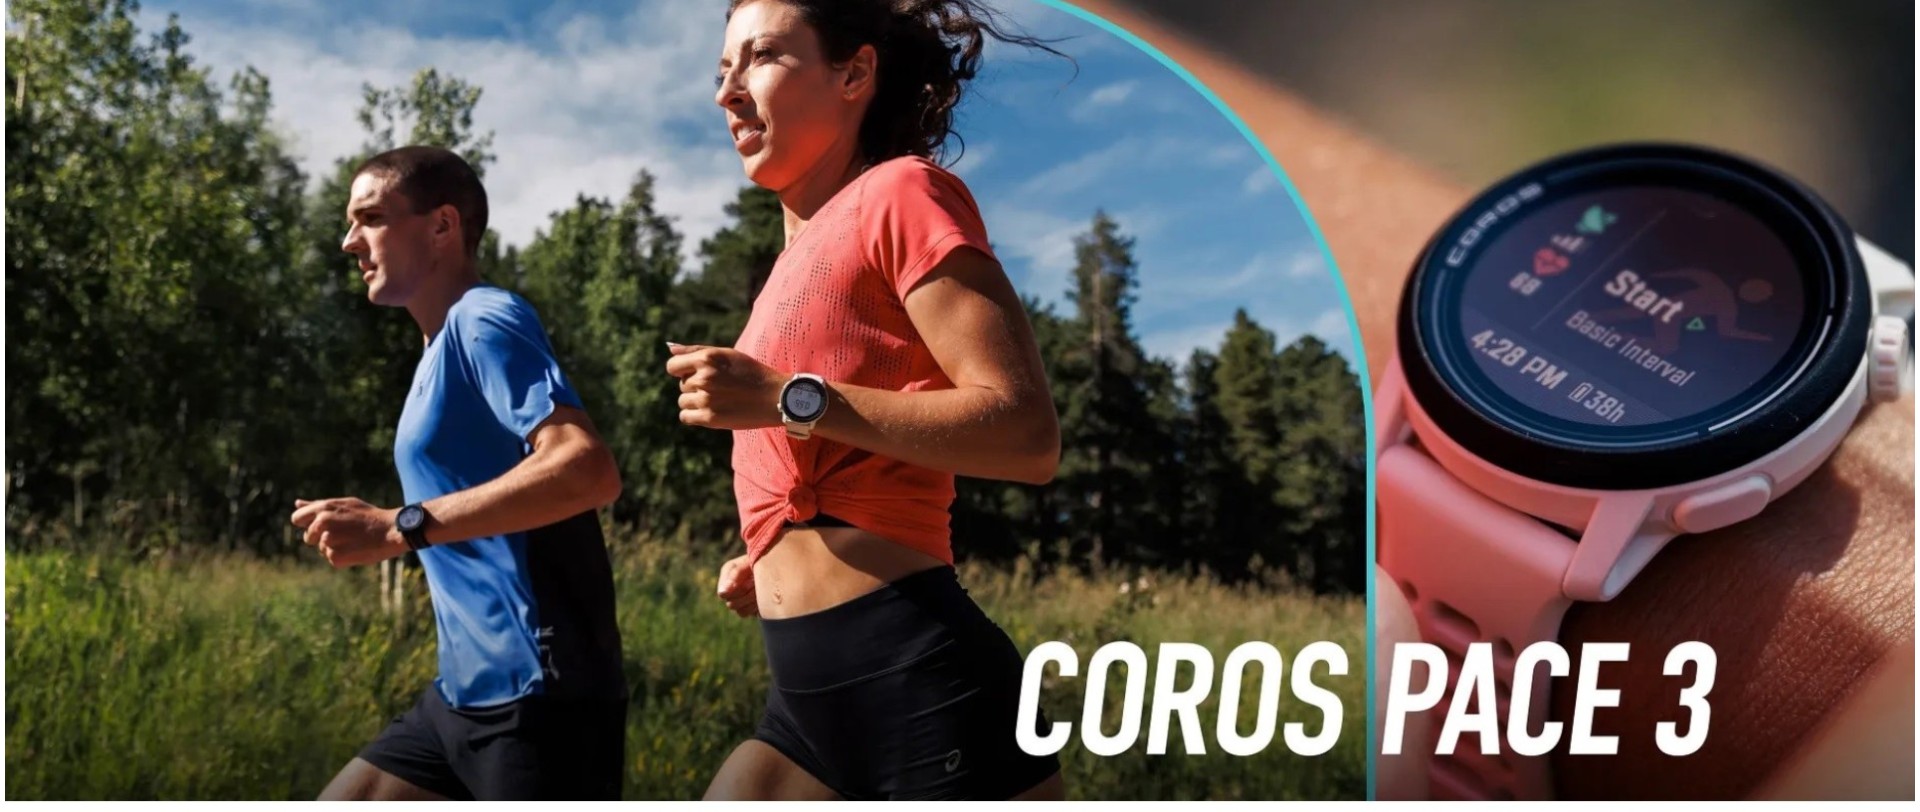 Introducing Coros Pace 3 Sports Watches